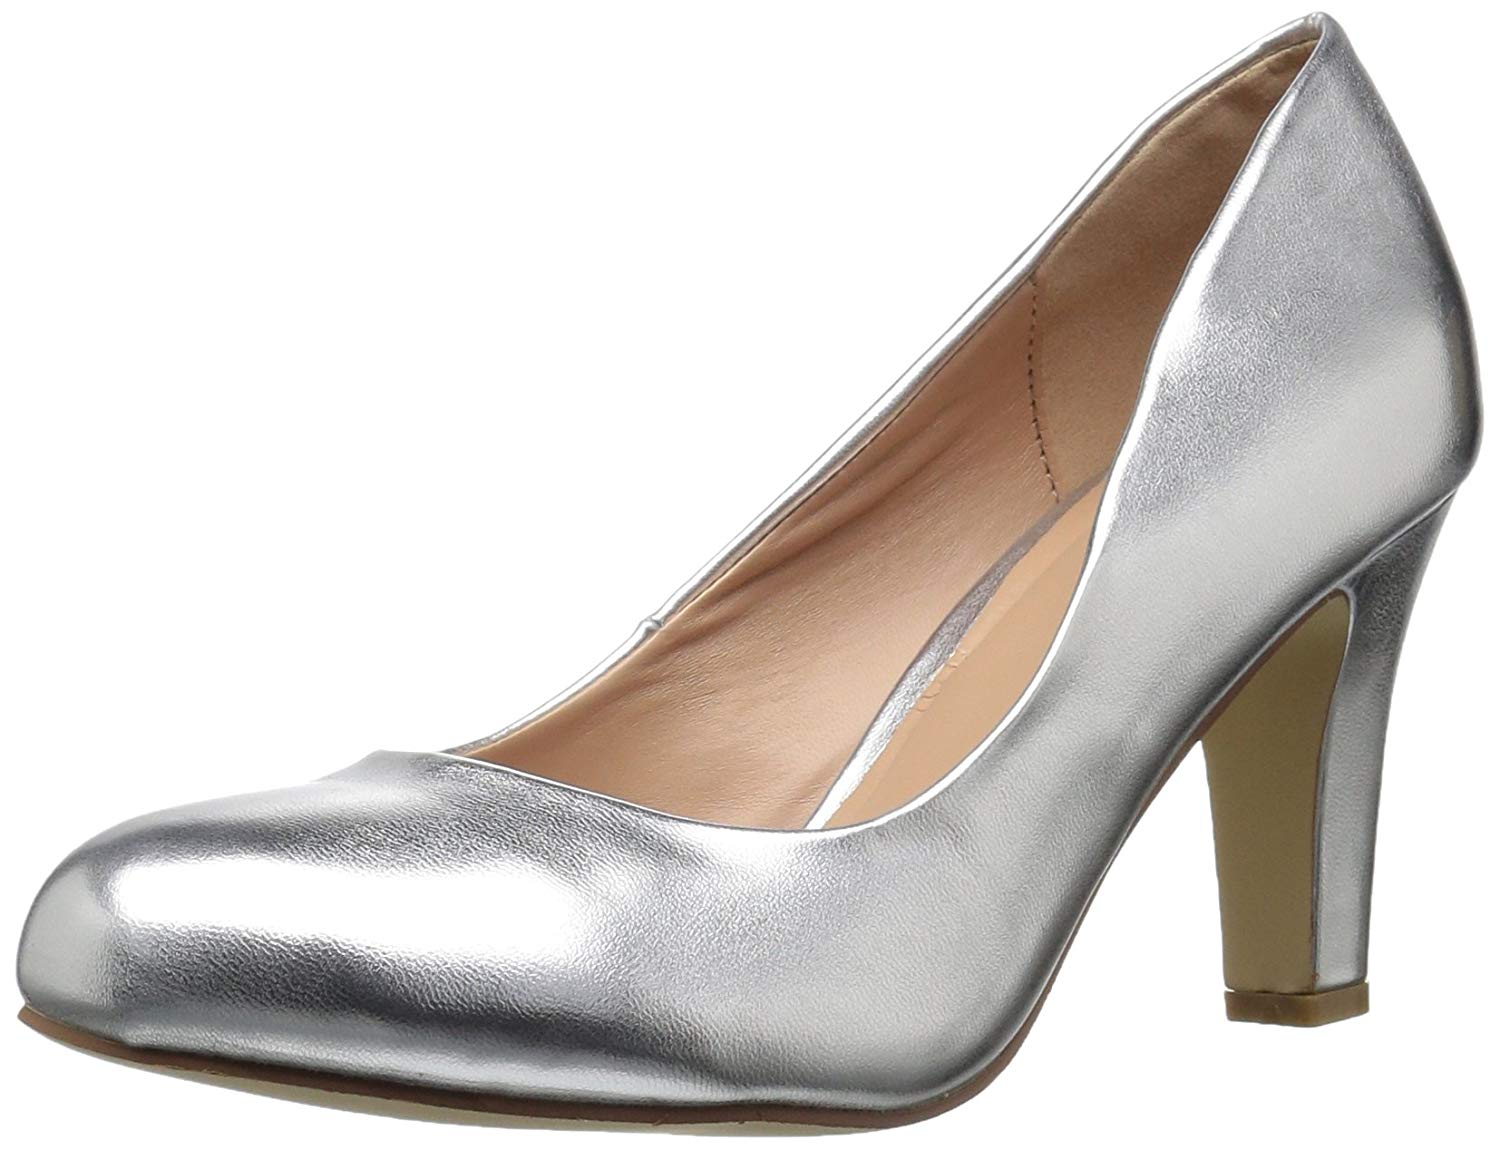 Journee Collection Womens Ice Closed Toe Classic Pumps, Silver, Size 6. ...